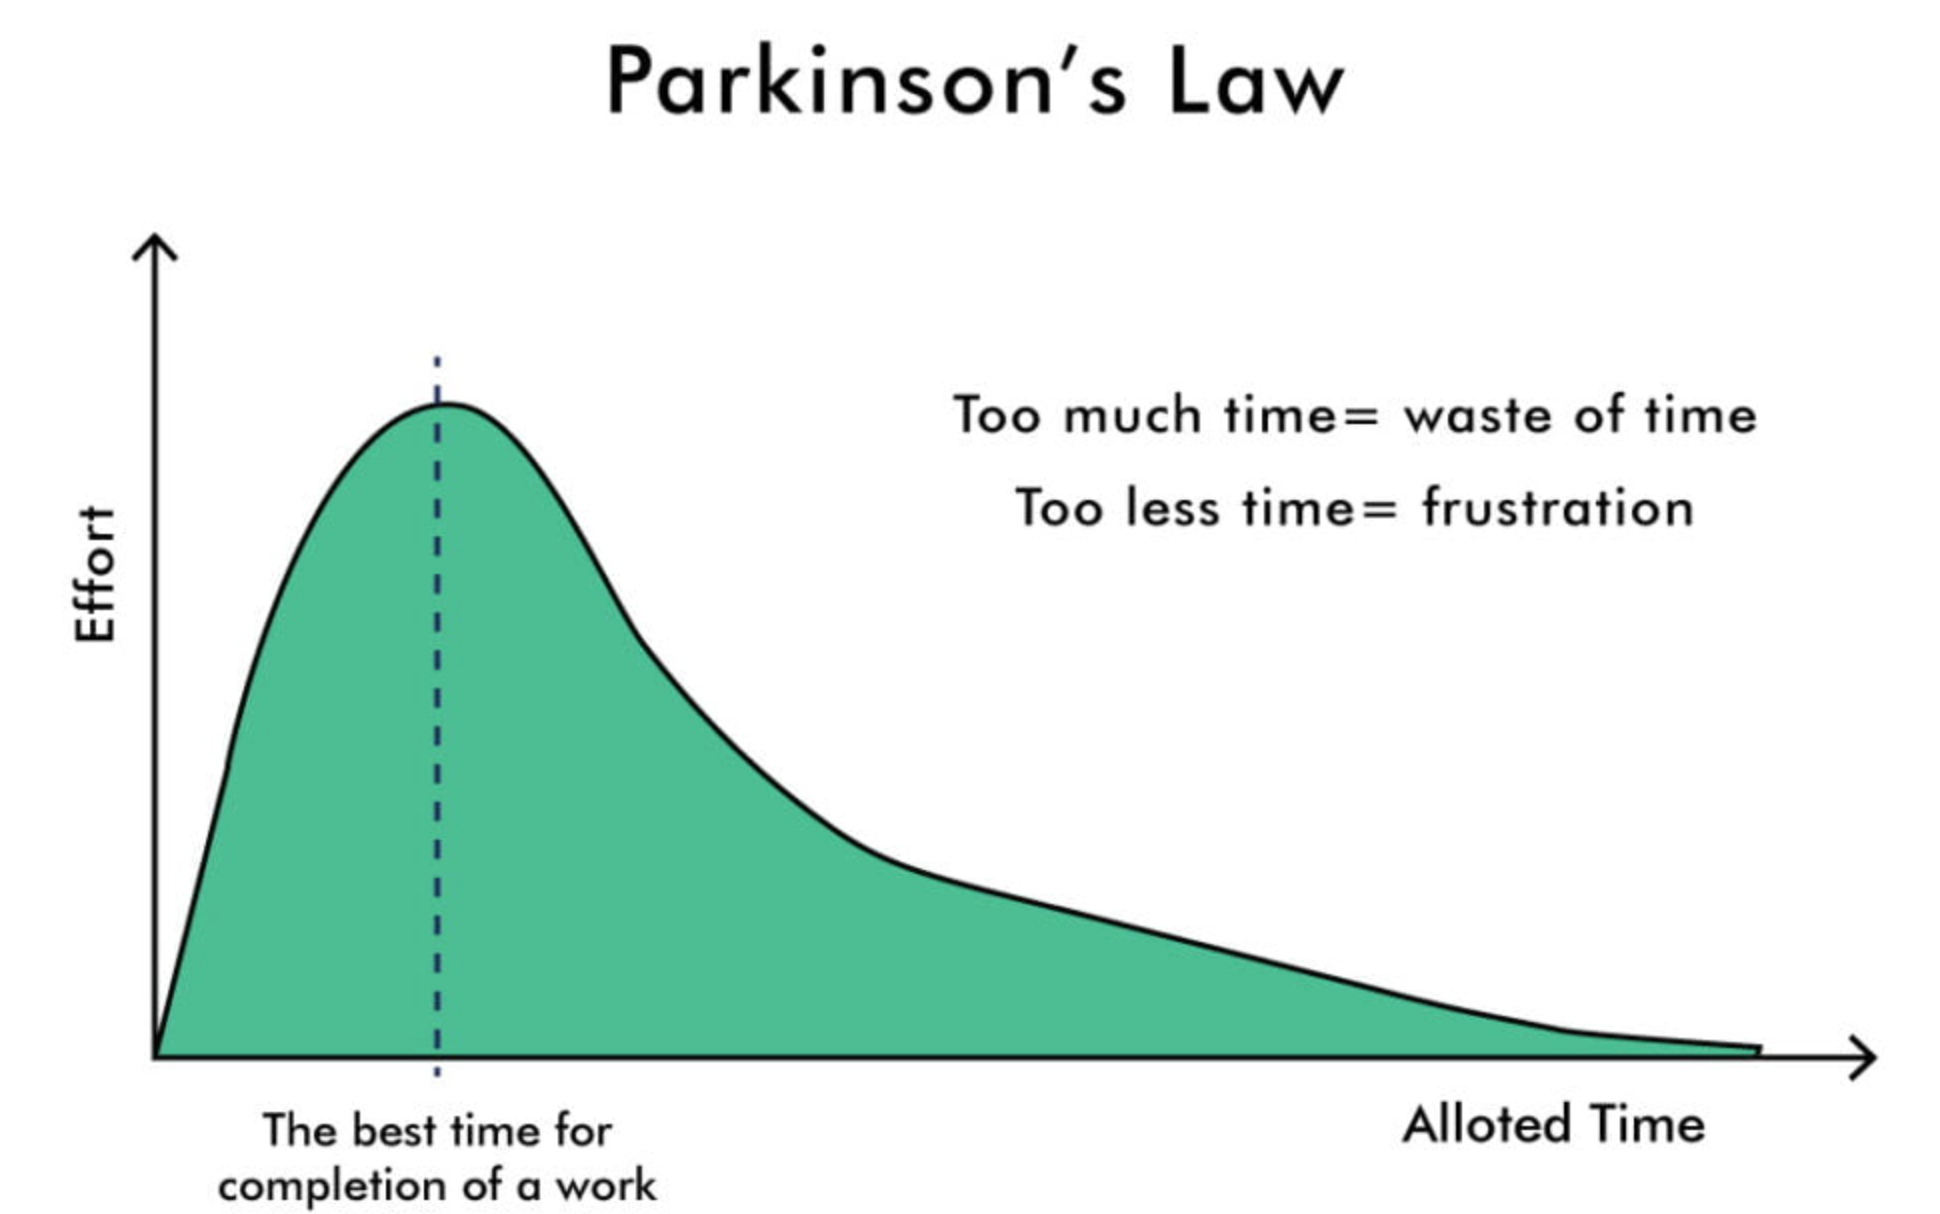 How to Use the Power of Parkinson's Law for Productivity